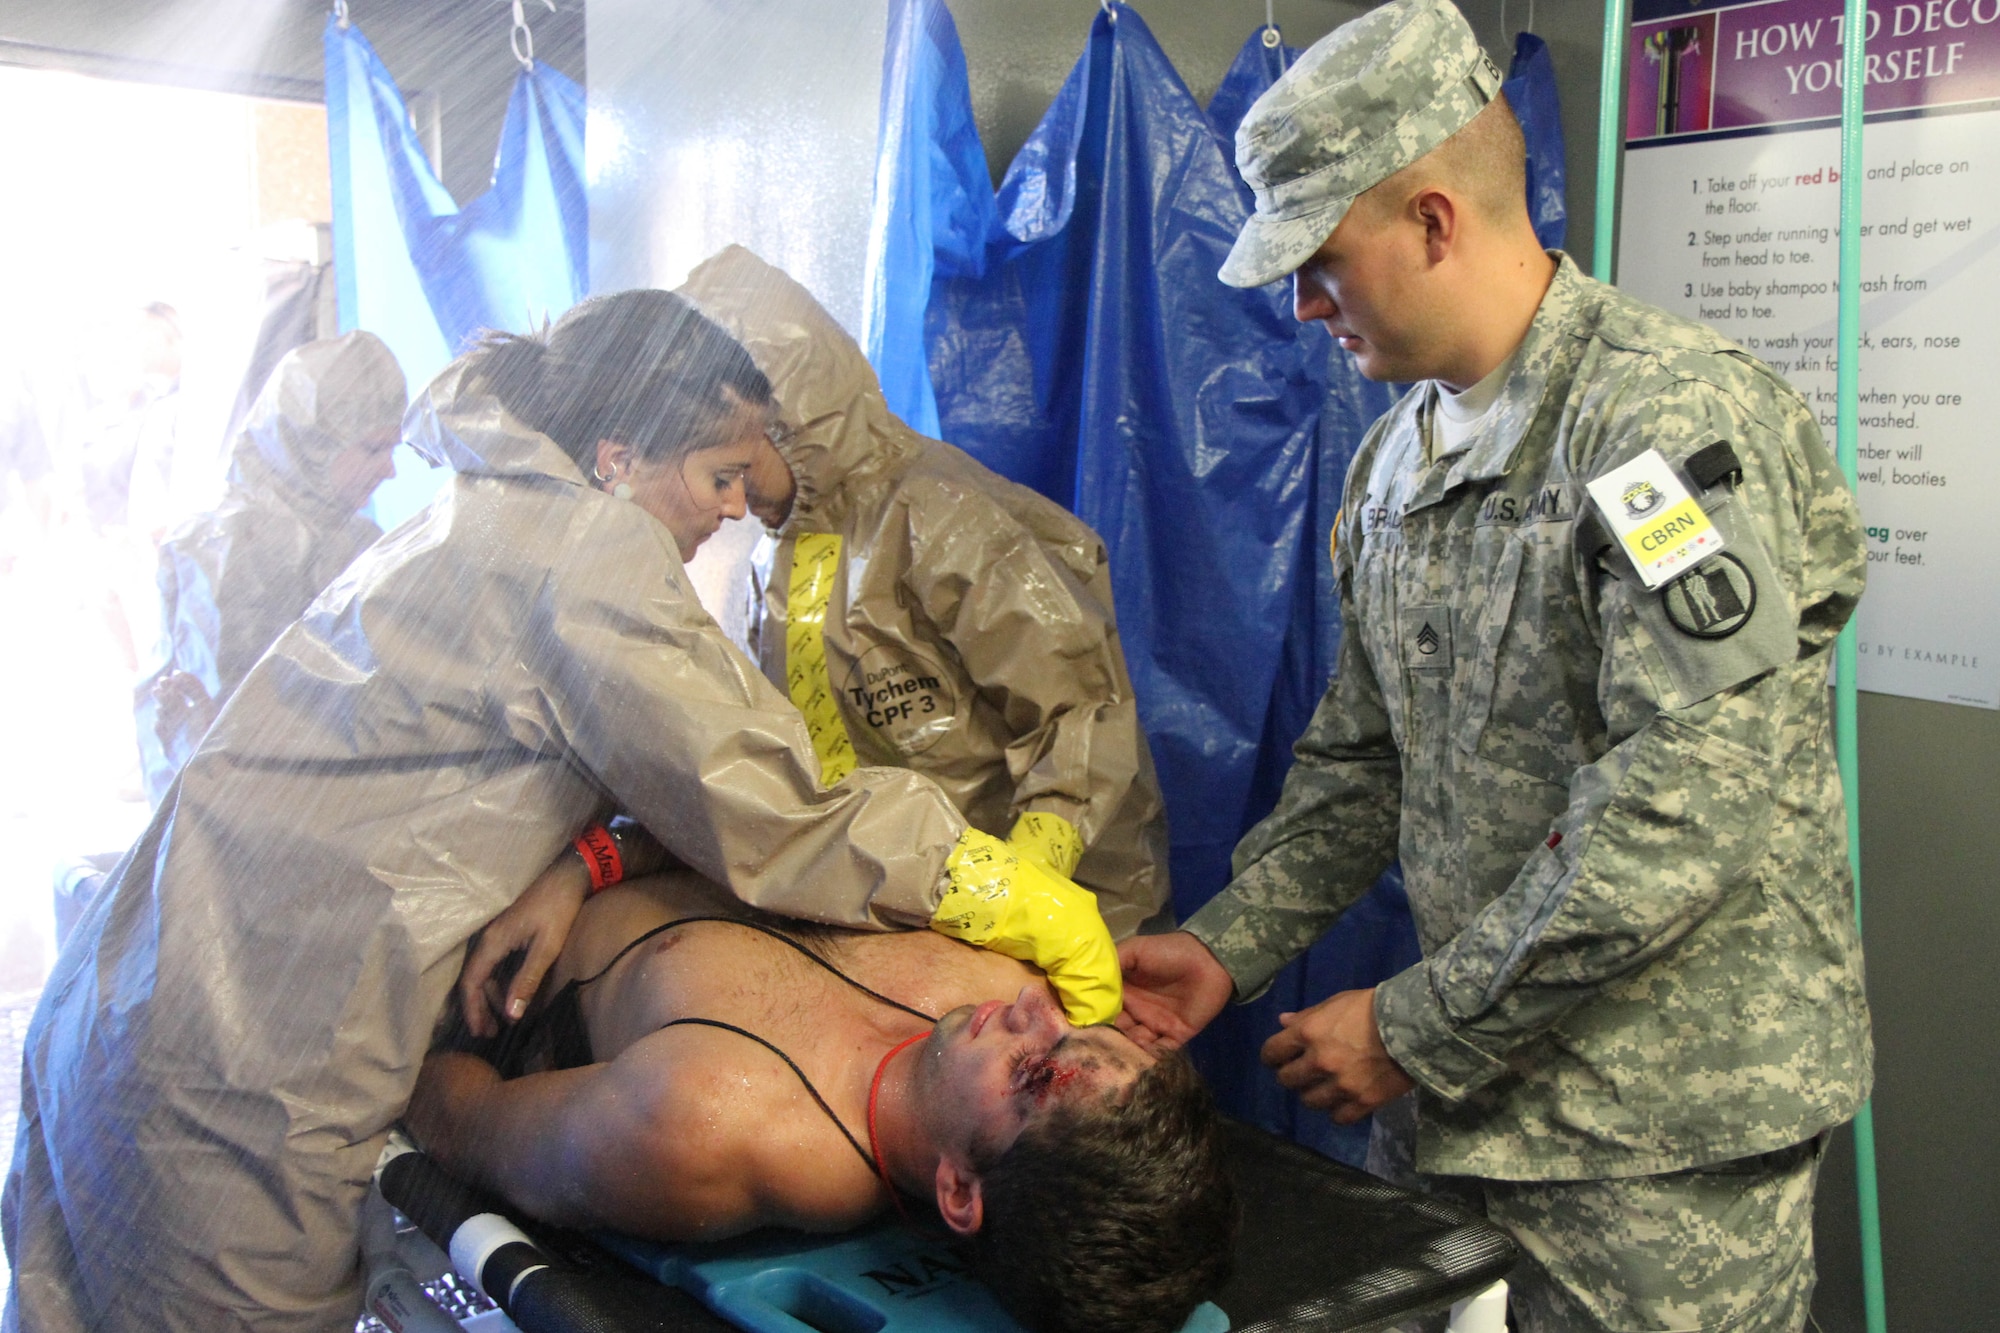 U.S. Army Staff Sgt. Jeff Brady, (right) decontamination readiness noncommissioned officer with the 115th Maintenance Company, Utah National Guard, assists emergency room nurses at Exempla St. Joseph Hospital with decontaminating a mock victim during a natural-disaster training scenario decontamination exercise, at Exempla St. Joseph Hospital in Denver, Colo., July 23, 2013, as part of the 2013 Vigilant Guard exercise. Vigilant Guard, hosted by the Colorado National Guard, is a large-scale, multi-state, multi-agency exercise focused on inter-agency coordination in preparation for emergencies and catastrophic events in Colorado. (U.S. Army National Guard photo by Spc. Zach Sheely)